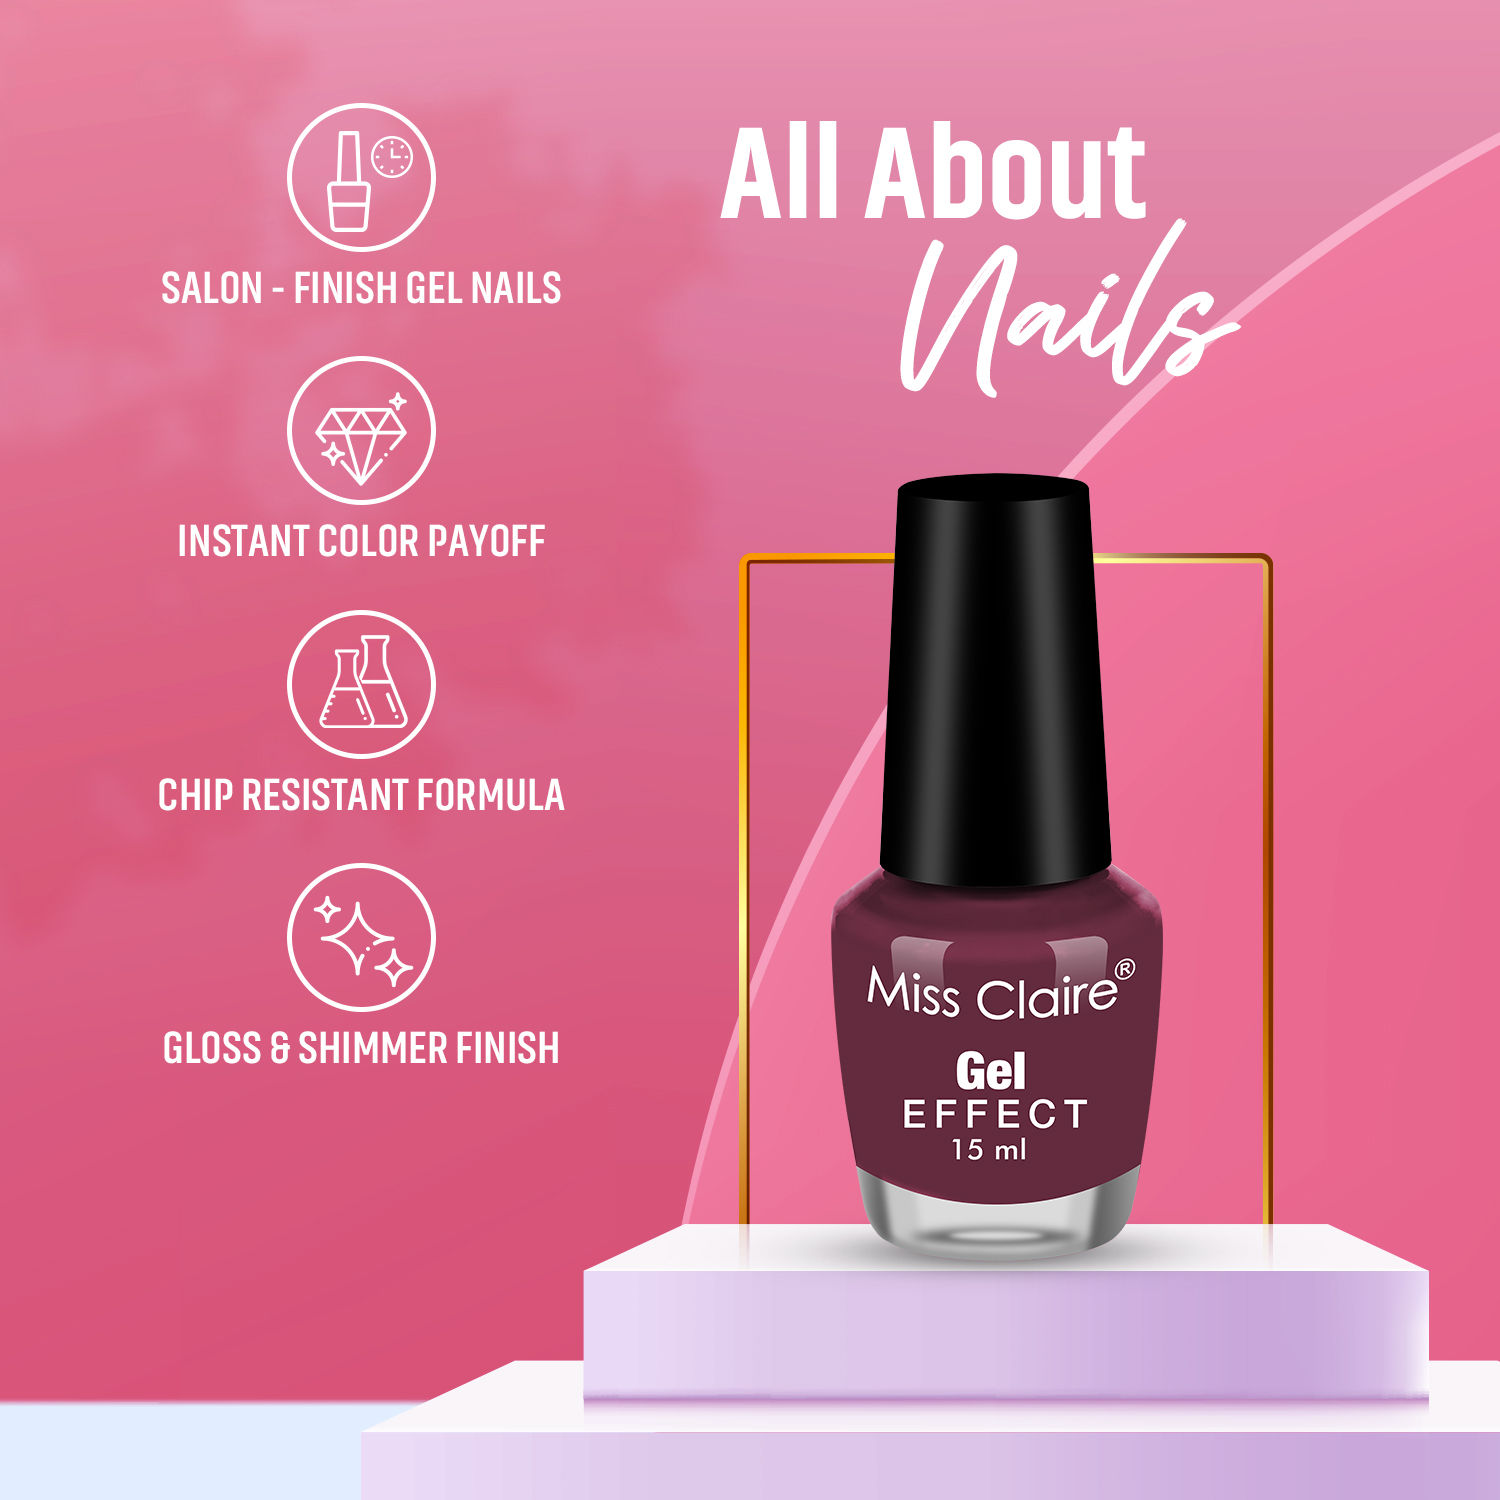 Buy 786 Vegan Wudhu Friendly Cosmetics Halal Nail Polish (Casablanca)  Online at Low Prices in India - Amazon.in